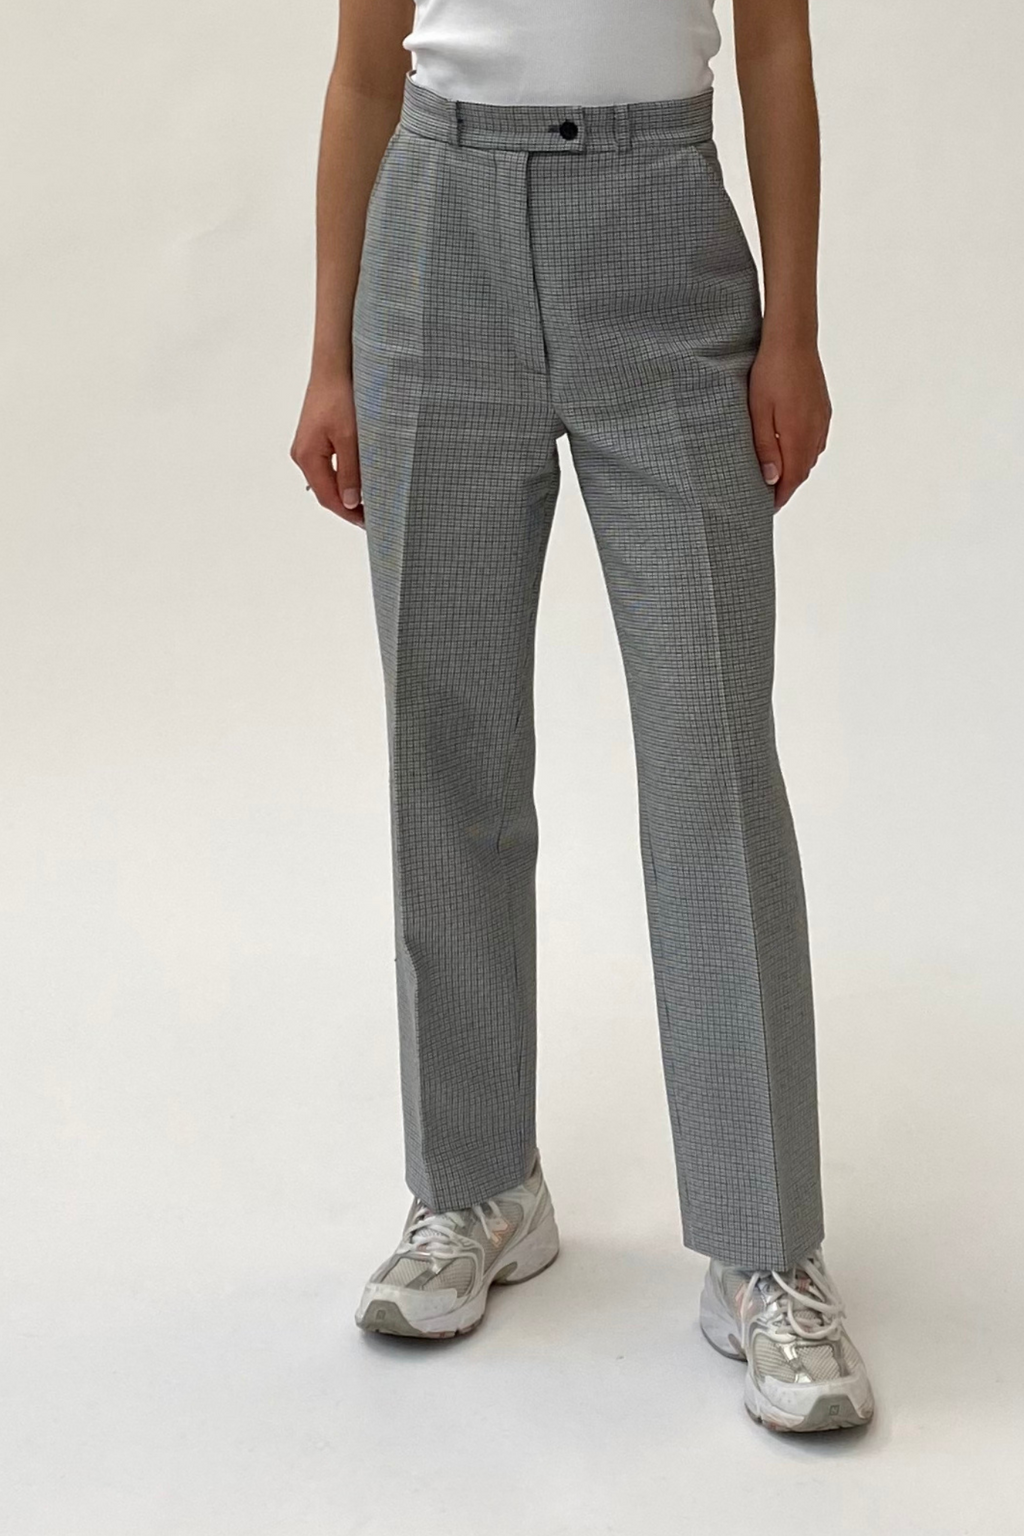 Grey Checkered Suit Pants